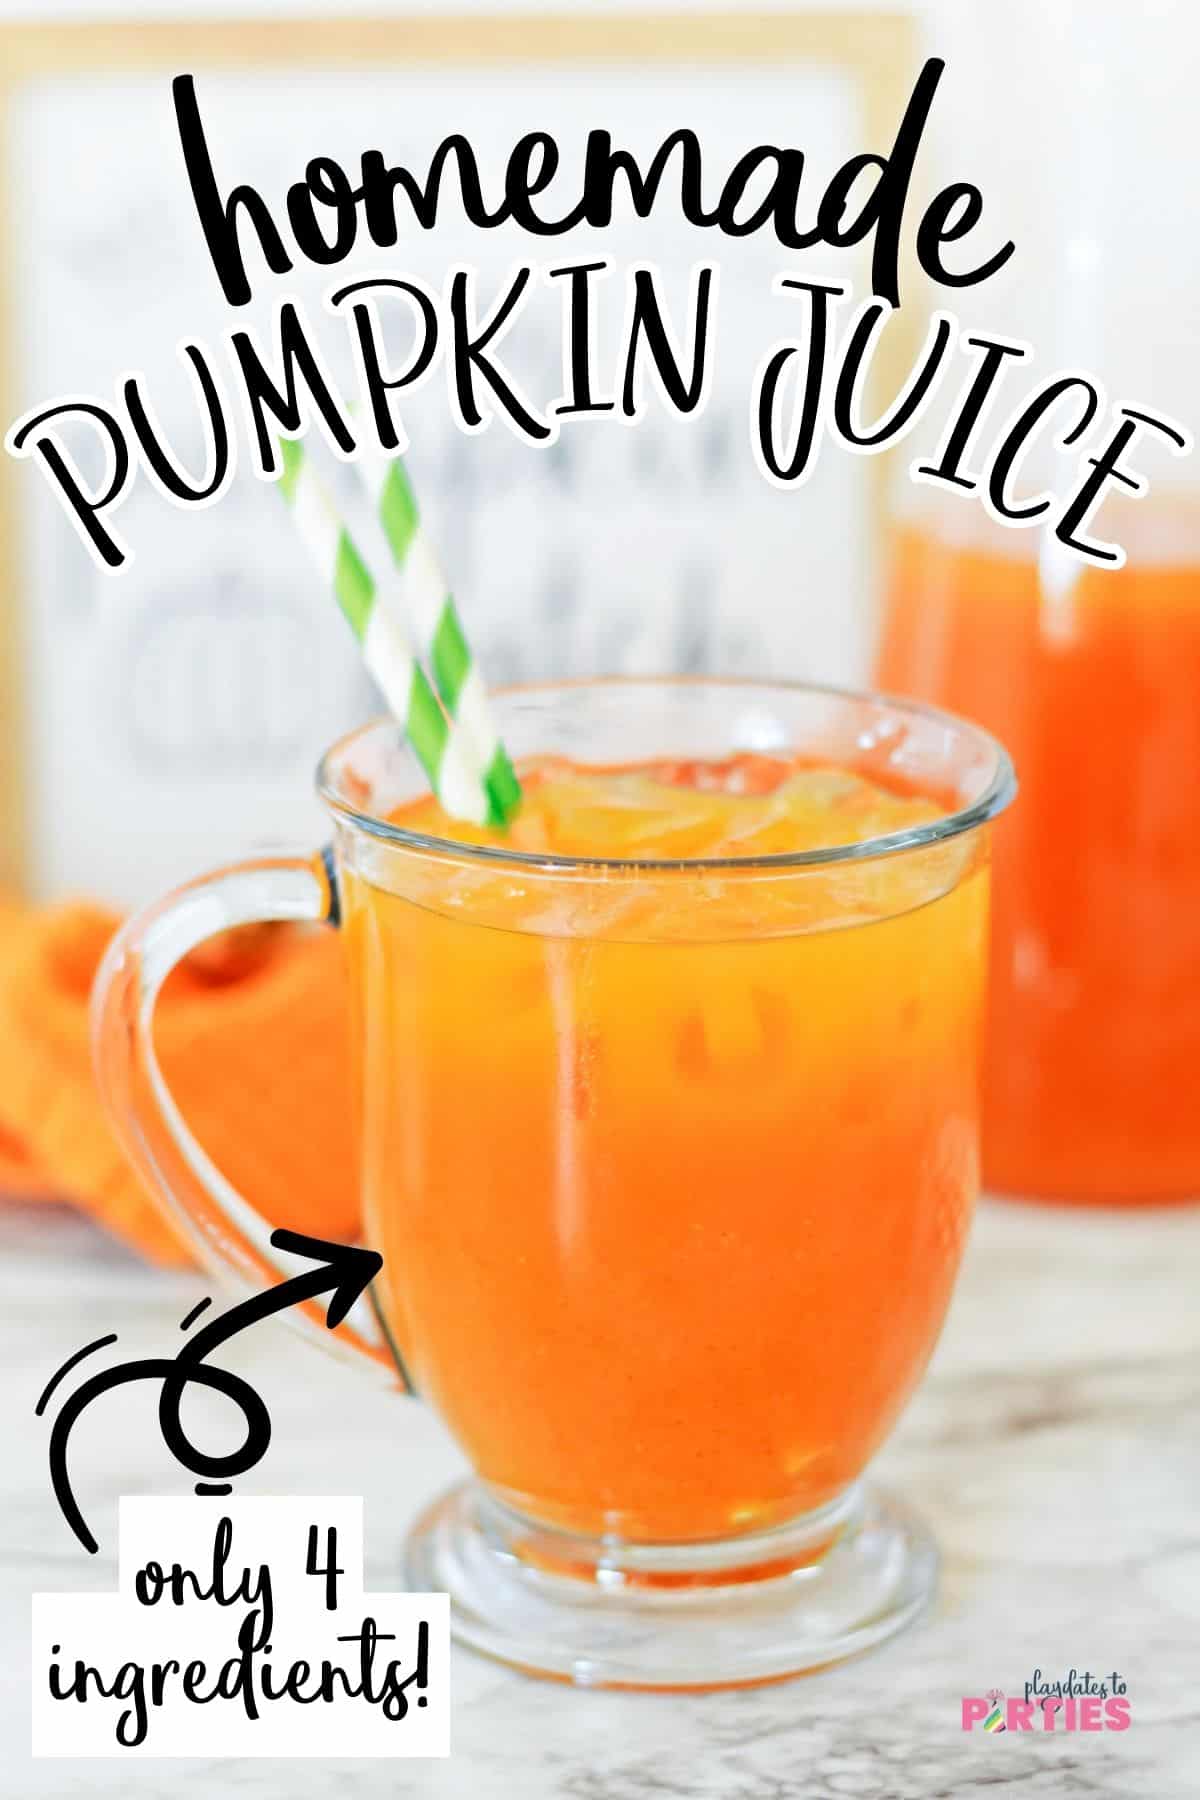 A glass mug with iced pumpkin juice with text overlay homemade pumpkin juice only 4 ingredients.